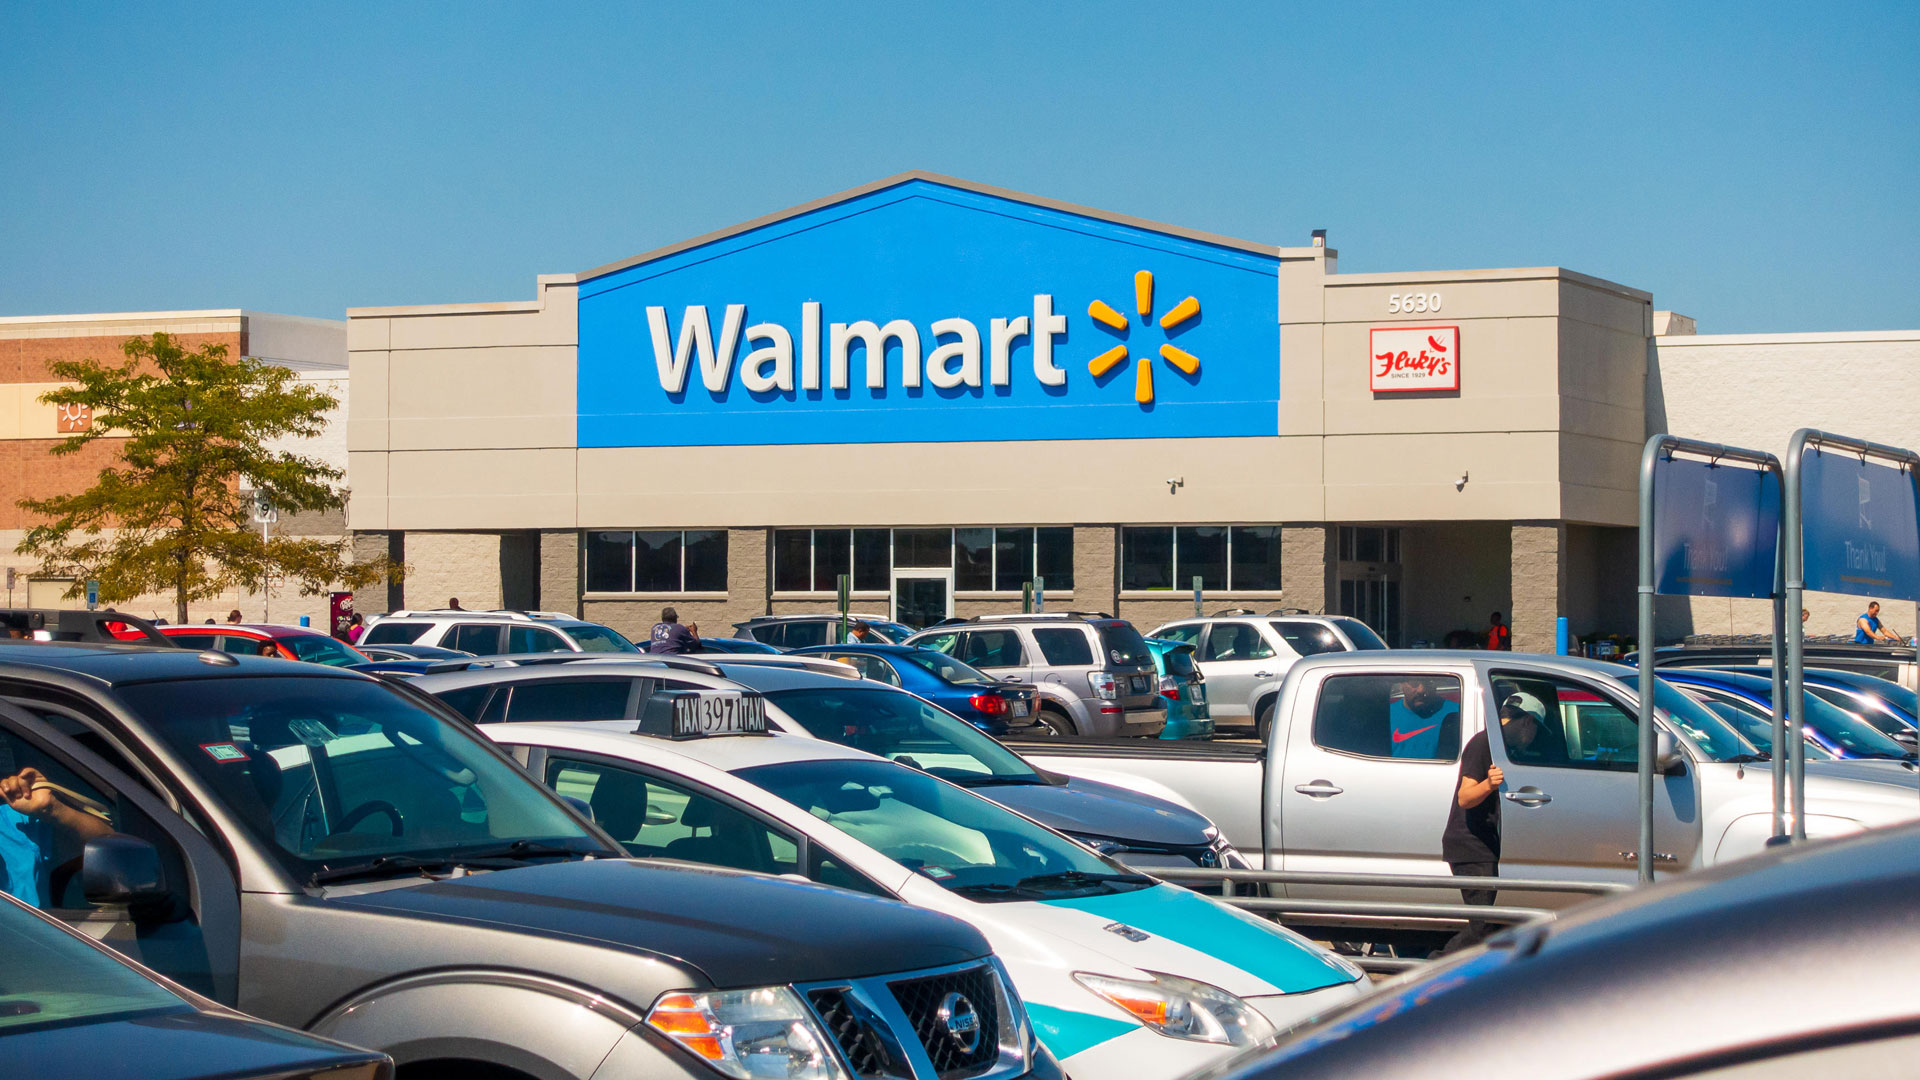 ‘People not computers’ blasts Walmart shopper after retailer makes U-turn to another location with self-checkout switch [Video]